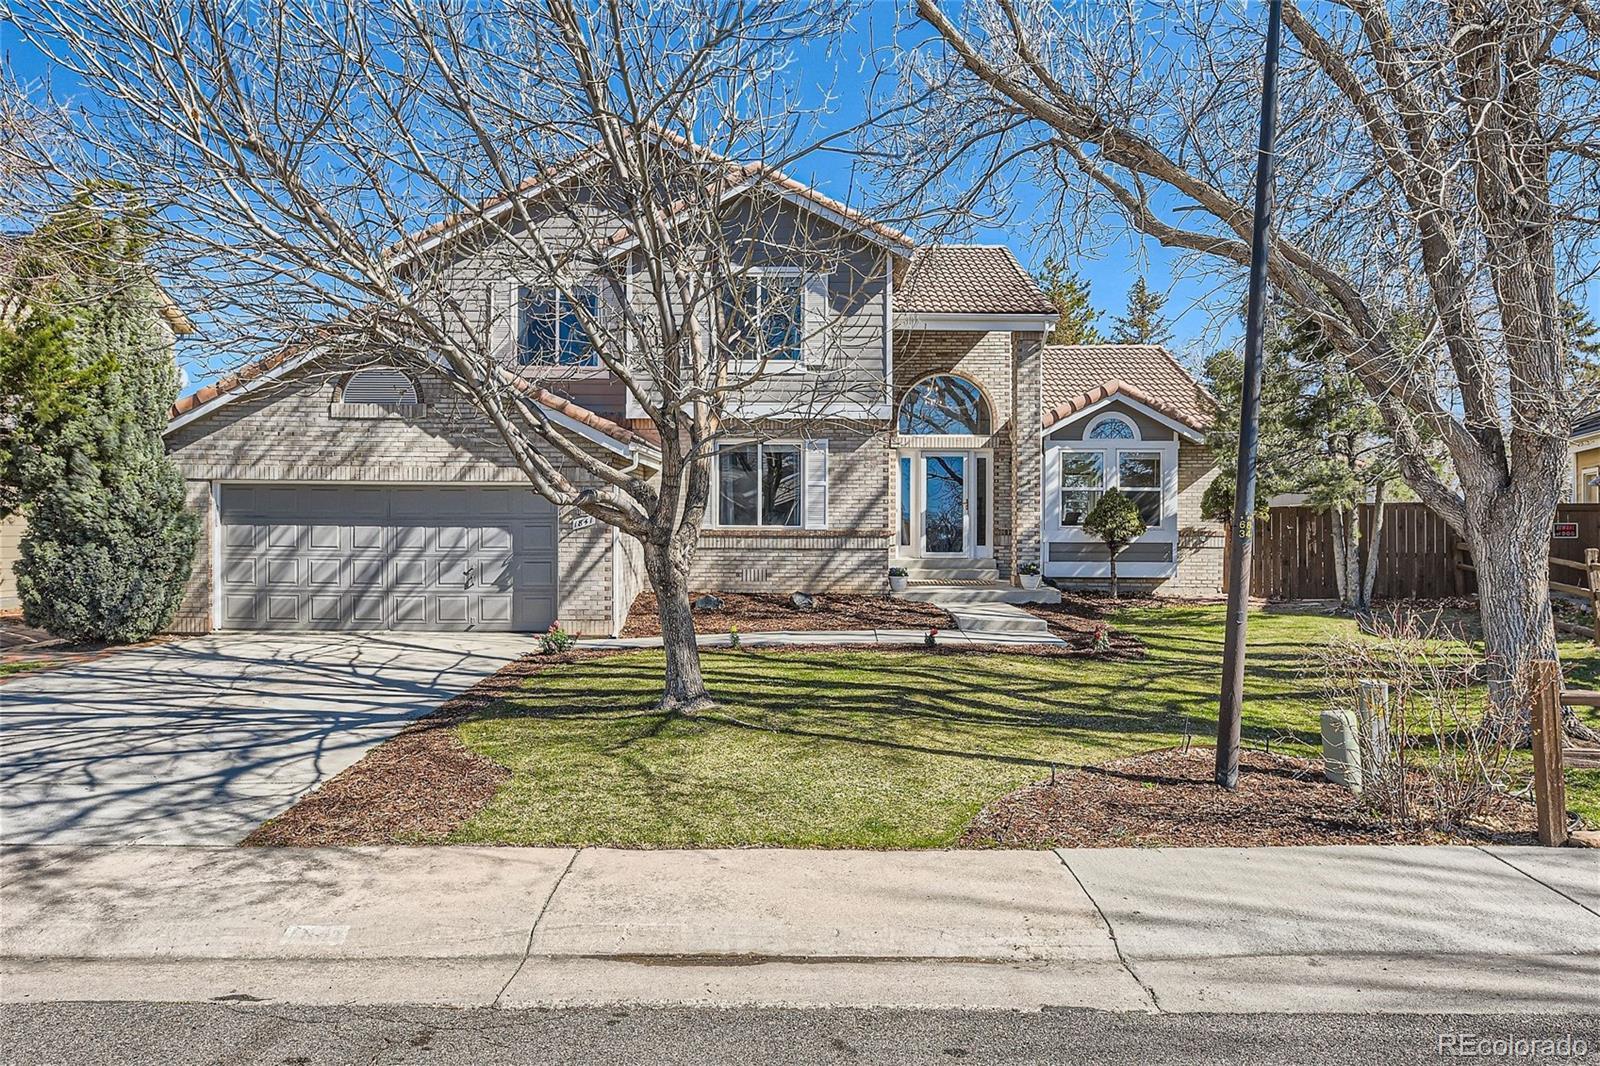 Photo one of 1841 Red Fox Pl Highlands Ranch CO 80126 | MLS 5758134